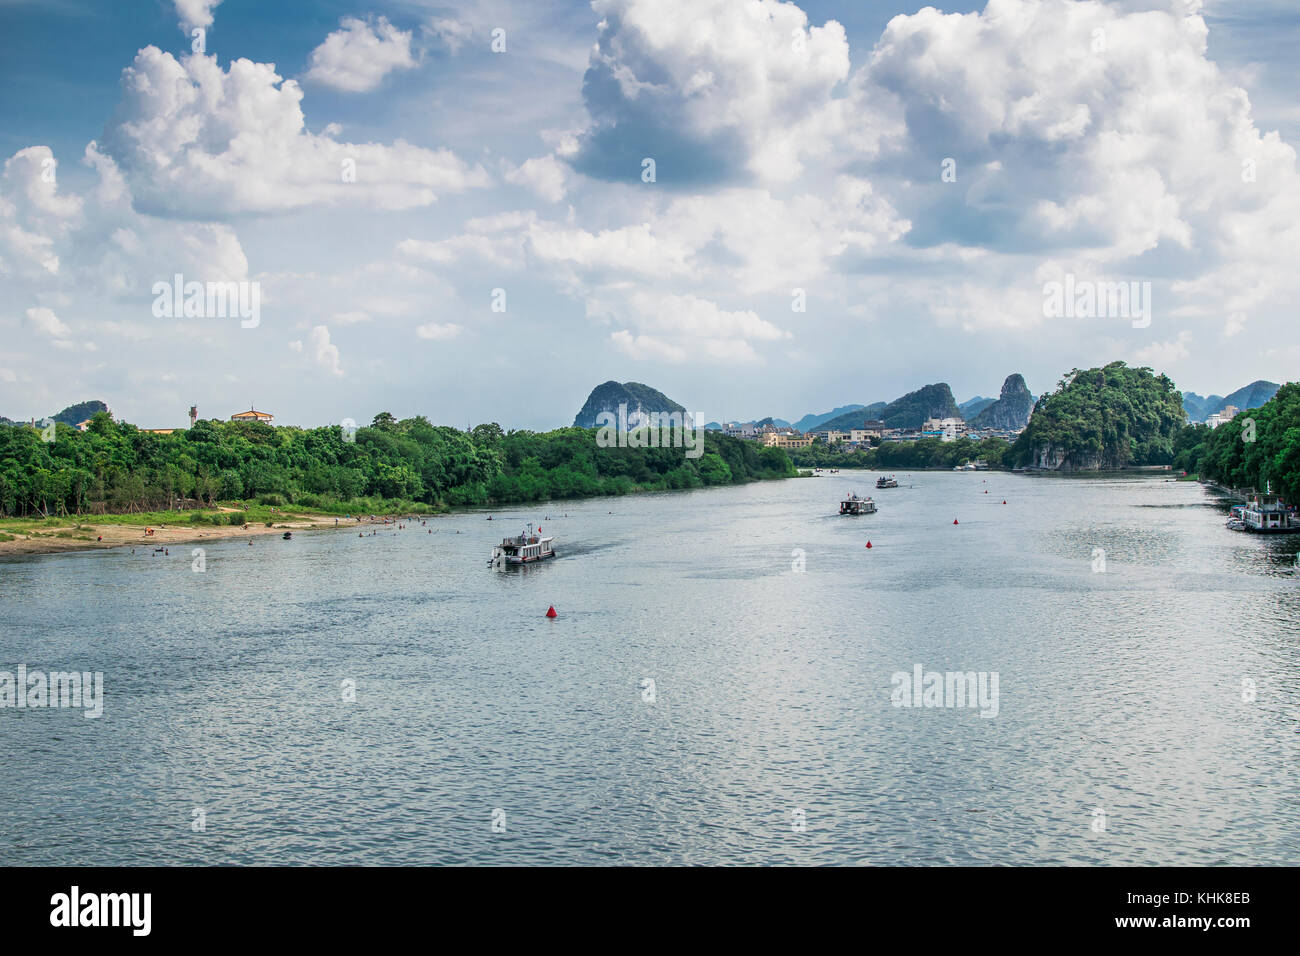 River landscape with boats in Guilin, China Stock Photo